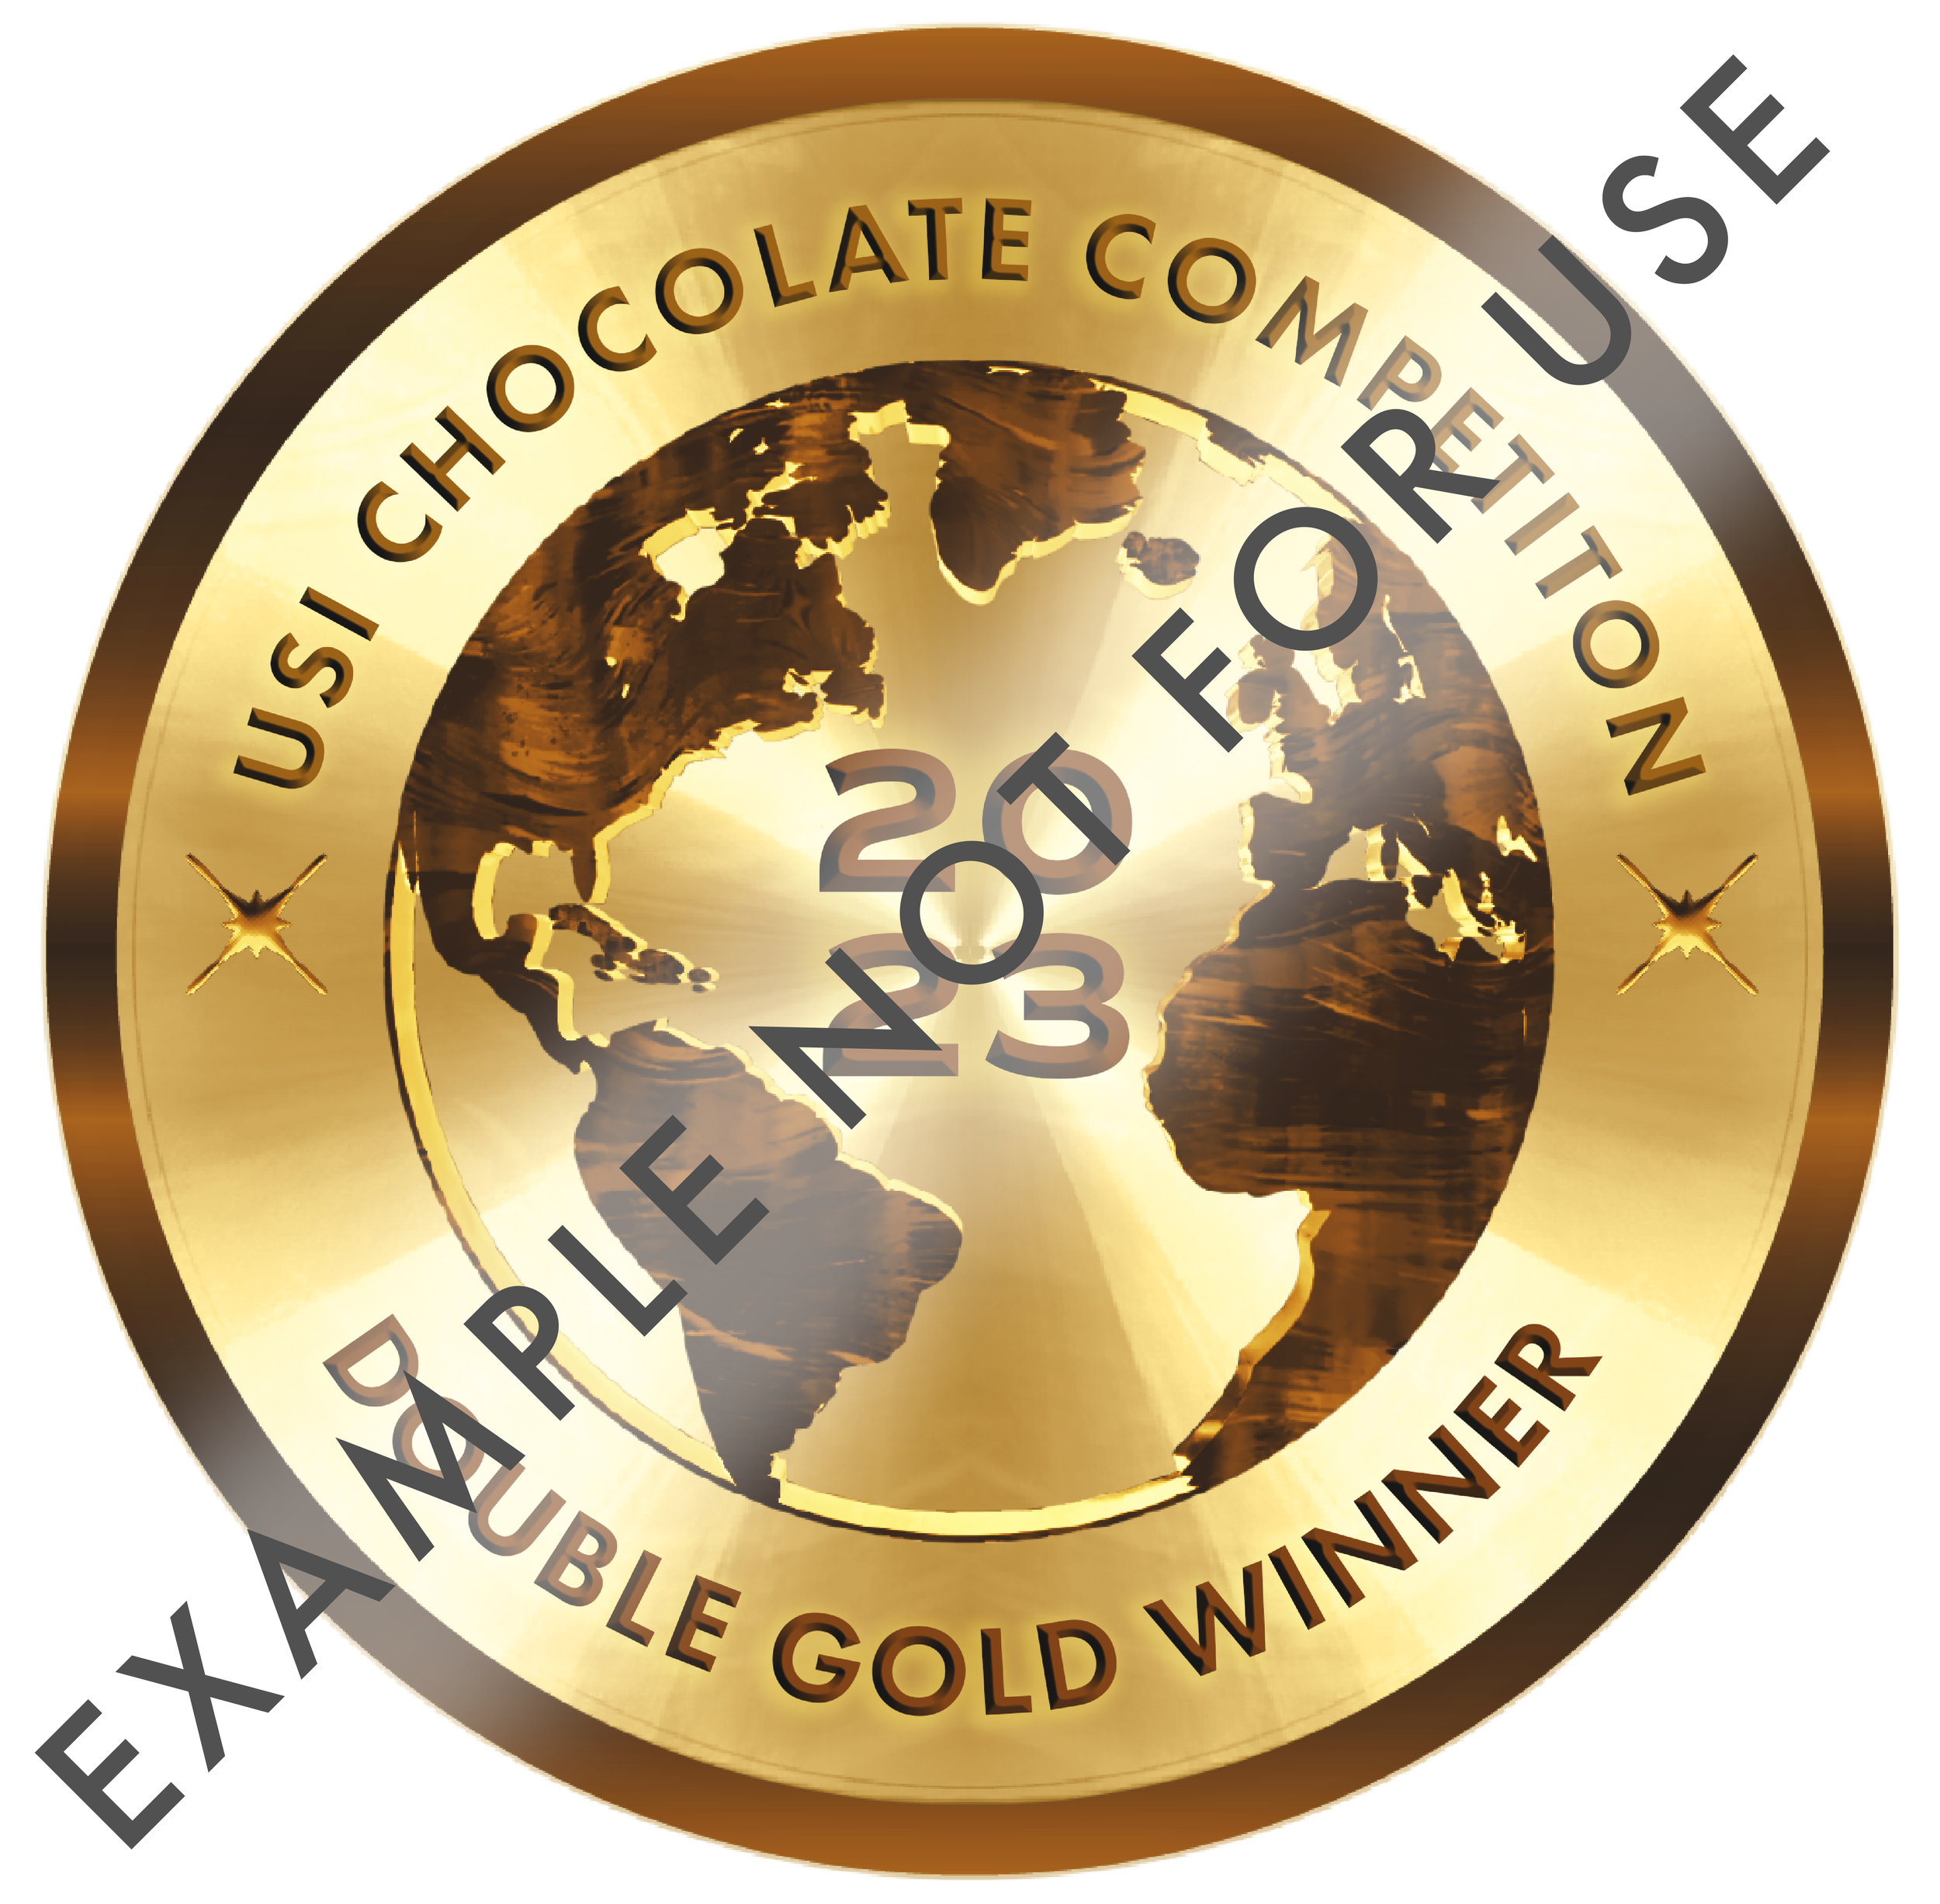 &lt;p&gt;&lt;strong&gt;Double Gold&lt;/strong&gt;Phenomenal Product (Must Be Unanimous Decision by Panelists)&lt;/p&gt;